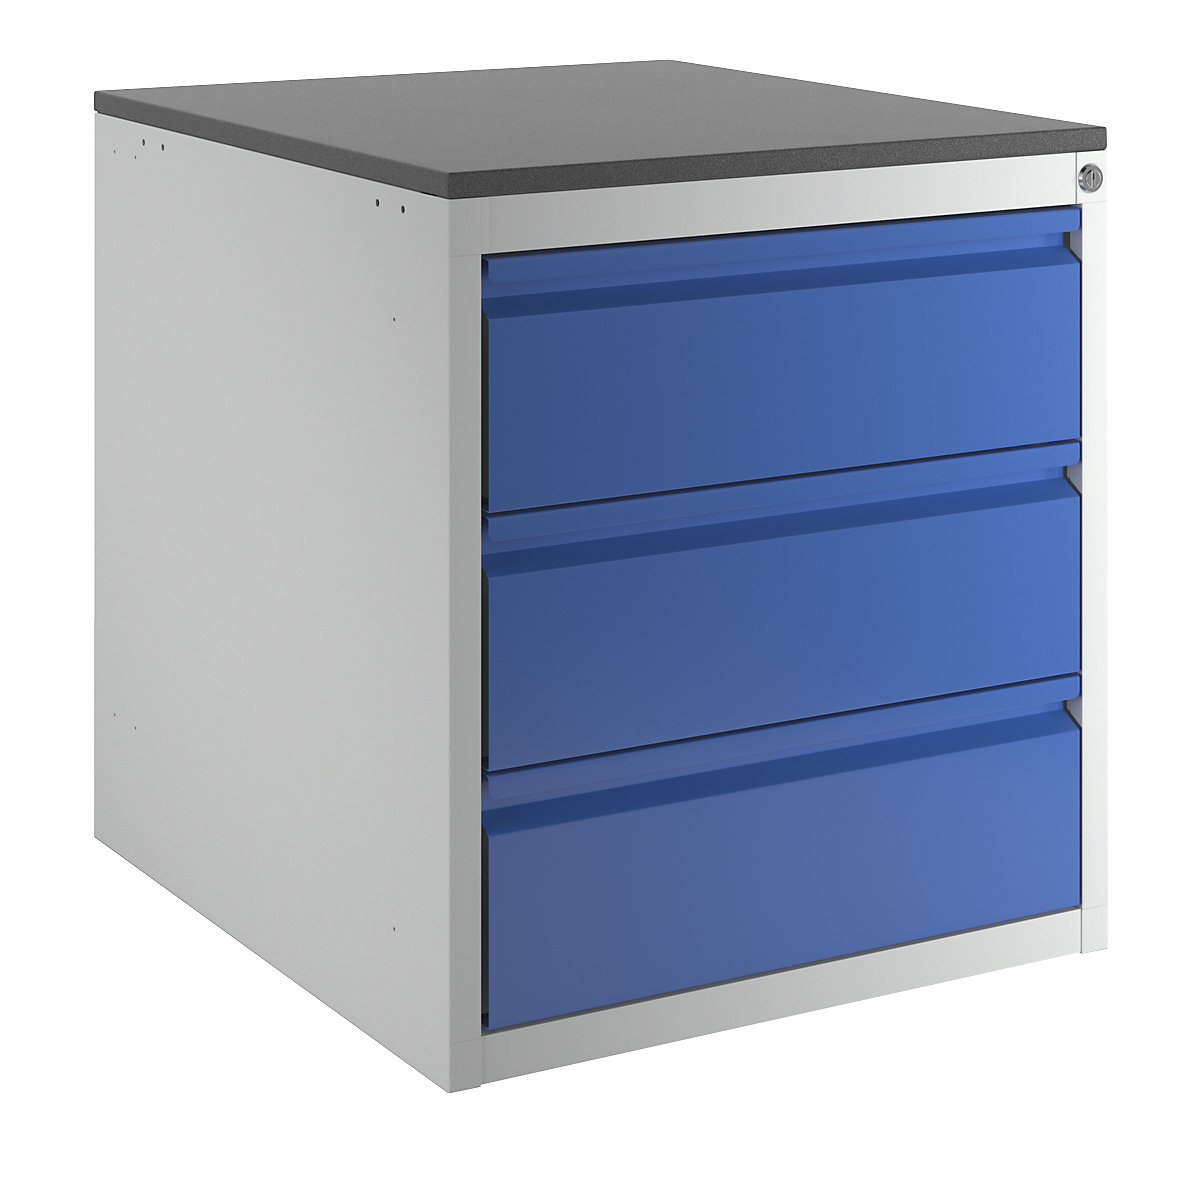 Drawer cupboard with telescopic guides – RAU, height 640 mm, 3 x 180 mm drawers, light grey / gentian blue, width 580 mm-6